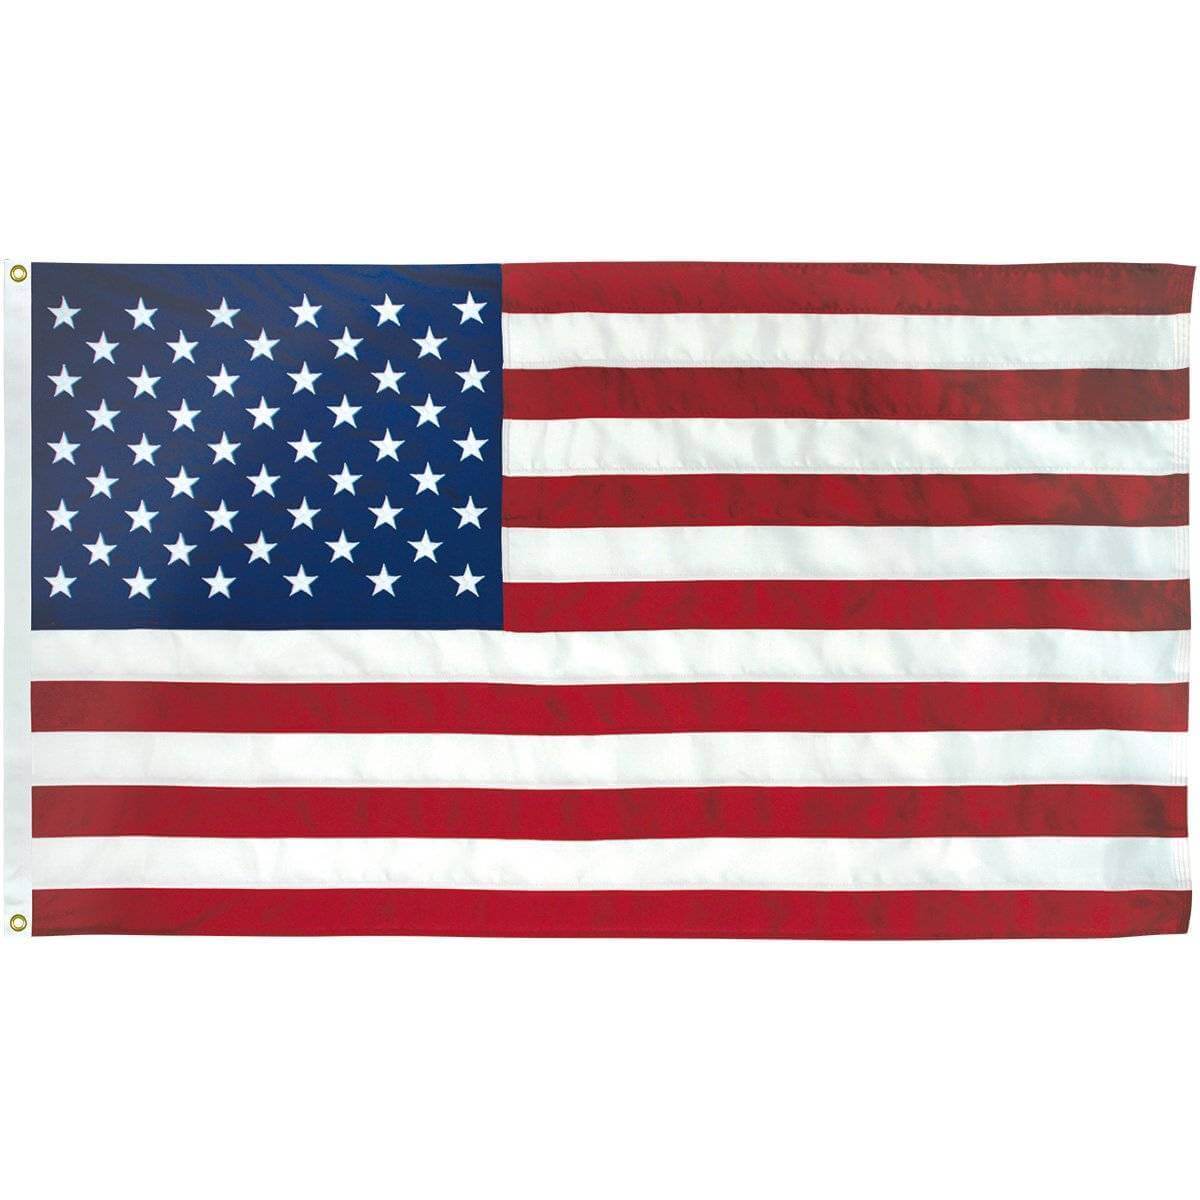 Collins/Eder Flag 3x5 / Poly-Max USA Flag-Commercial-Poly-Max Embroidered -3x5,4x6,5x8,6x10,50x80 ft (Made in America)